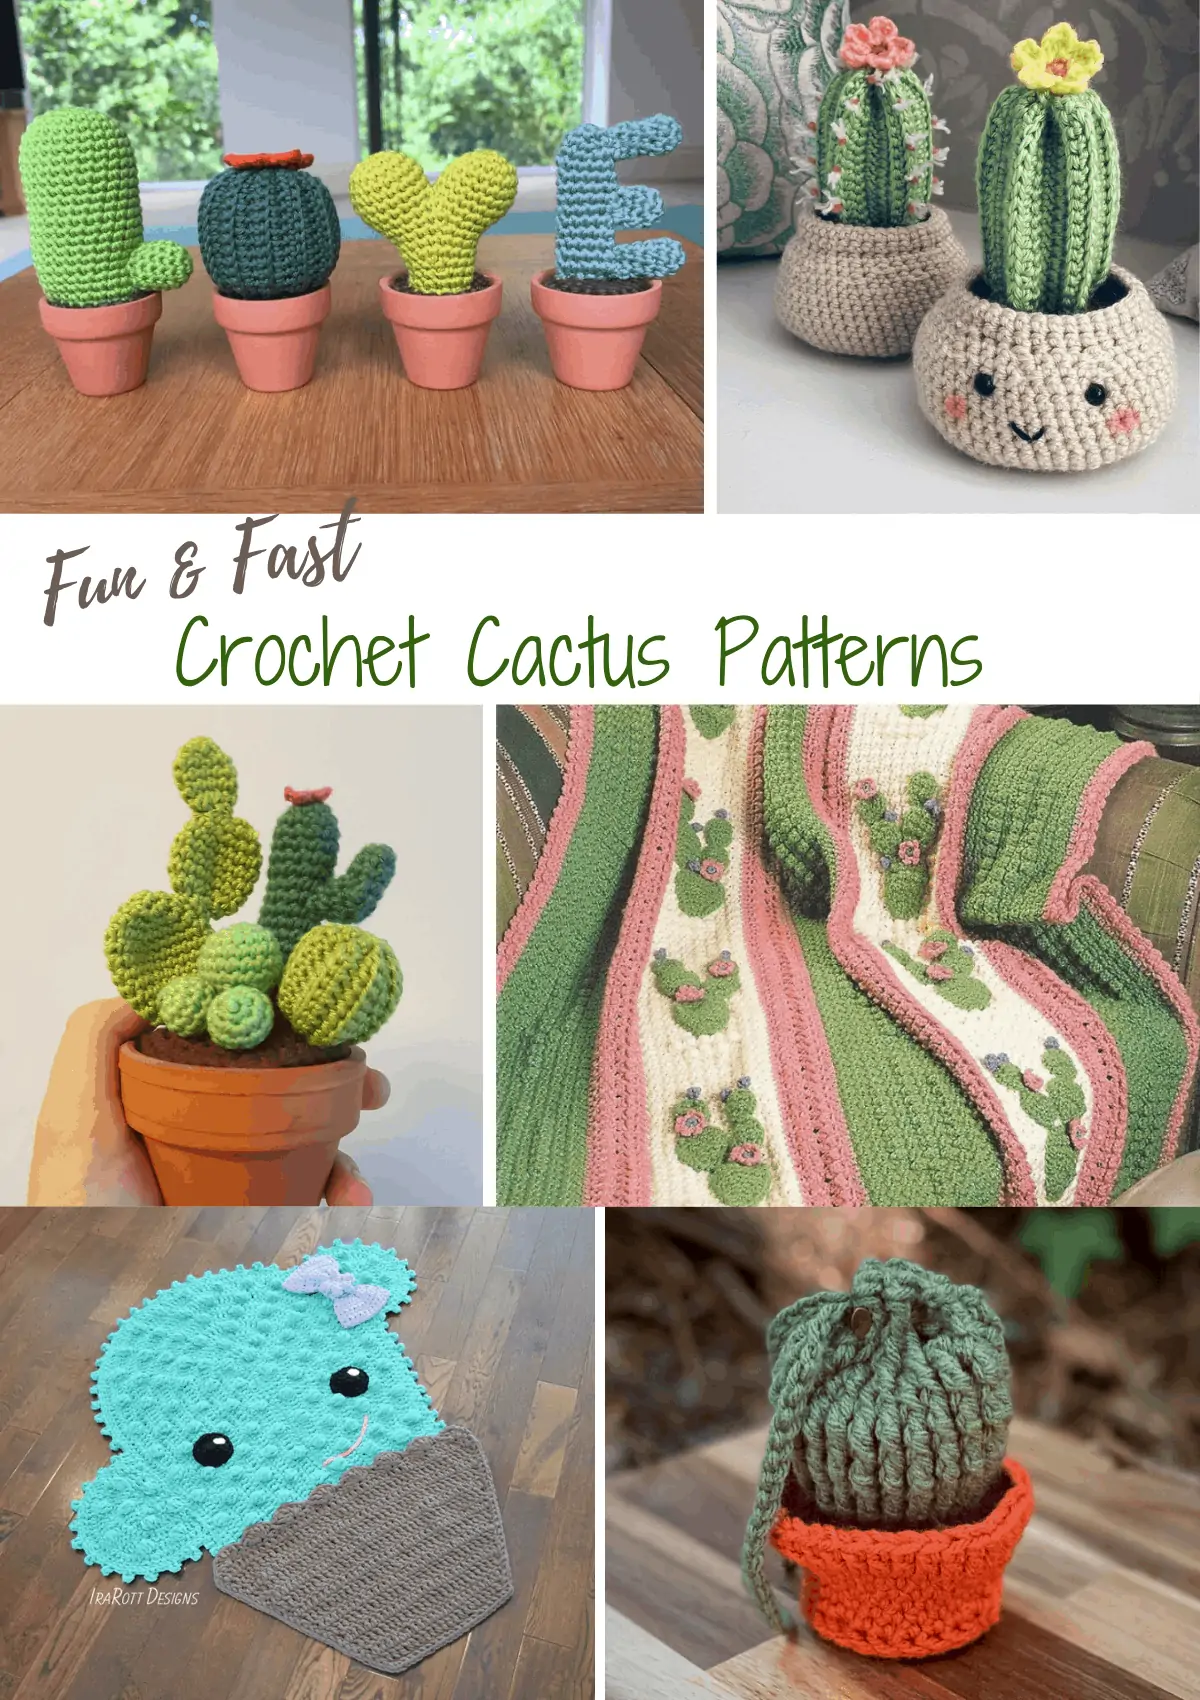 Charming Crochet Cactus to Brighten Your Day - Crochet 365 Knit Too